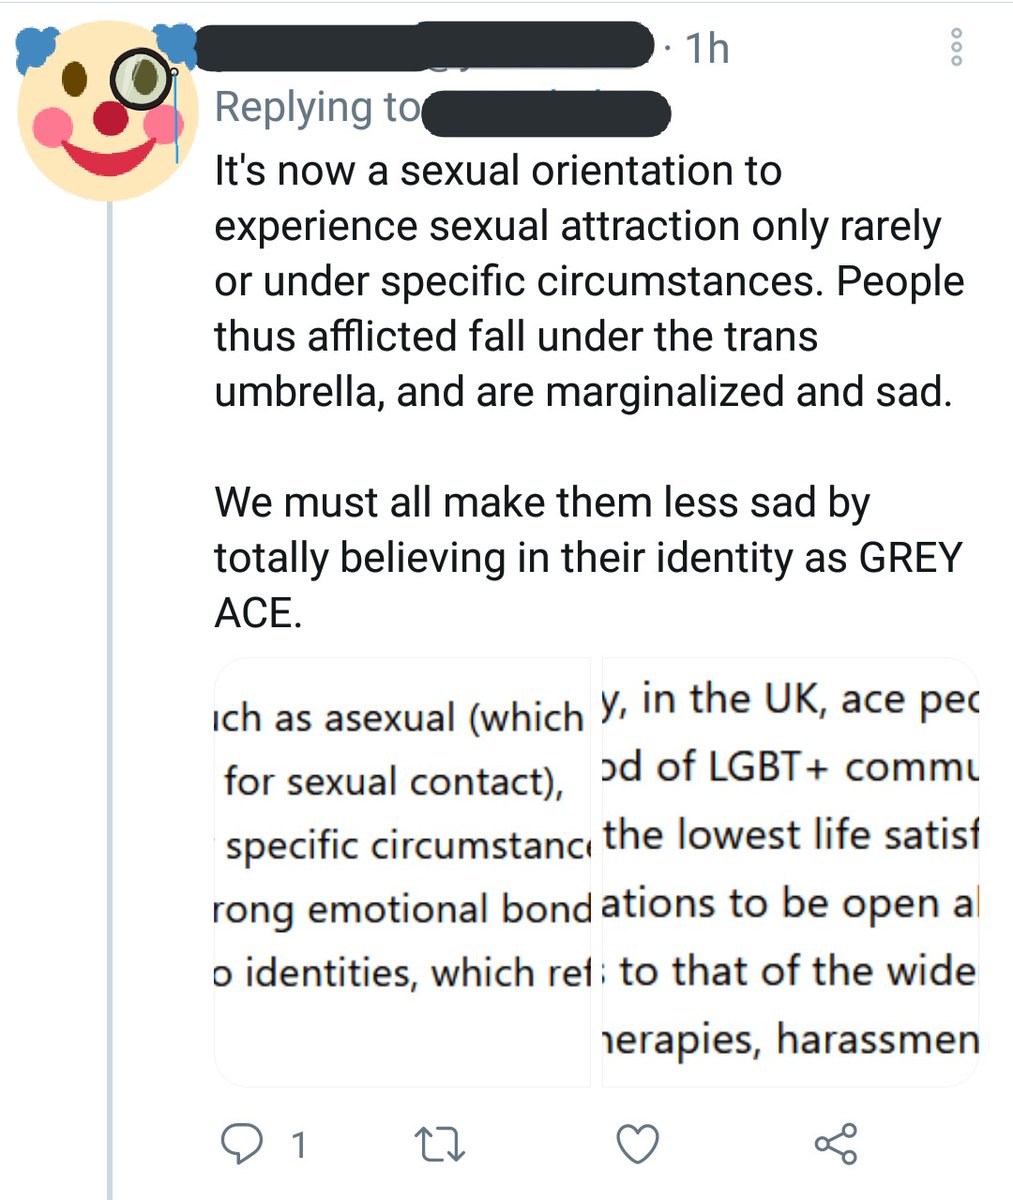 "People thus afflicted fall under the trans umbrella" is some impressive mental gymnasticsKW: "aphobic and proud" "by definition" "free diagnosis" "transphobia" "terf logic"